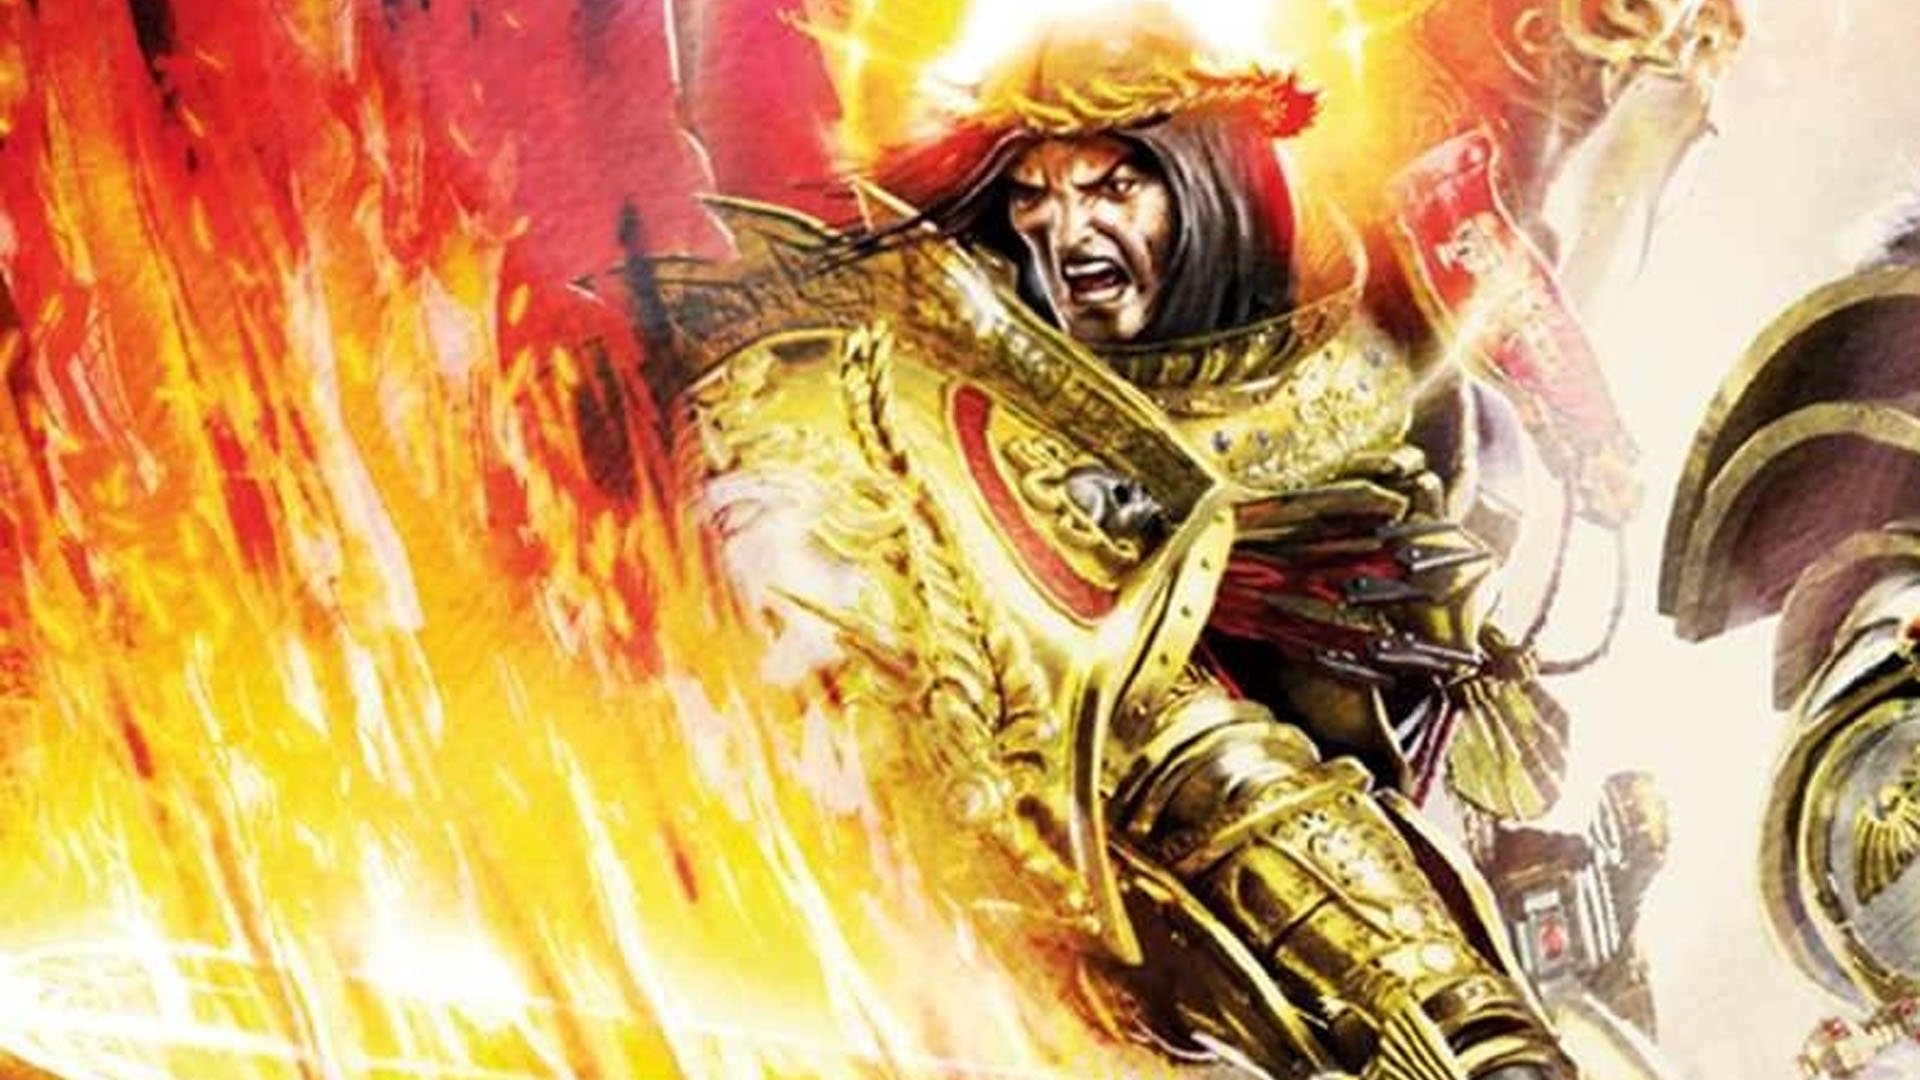 Warhammer 40k Emperor of Mankind guide - Games Workshop artwork showing the Emperor in battle with his flaming sword